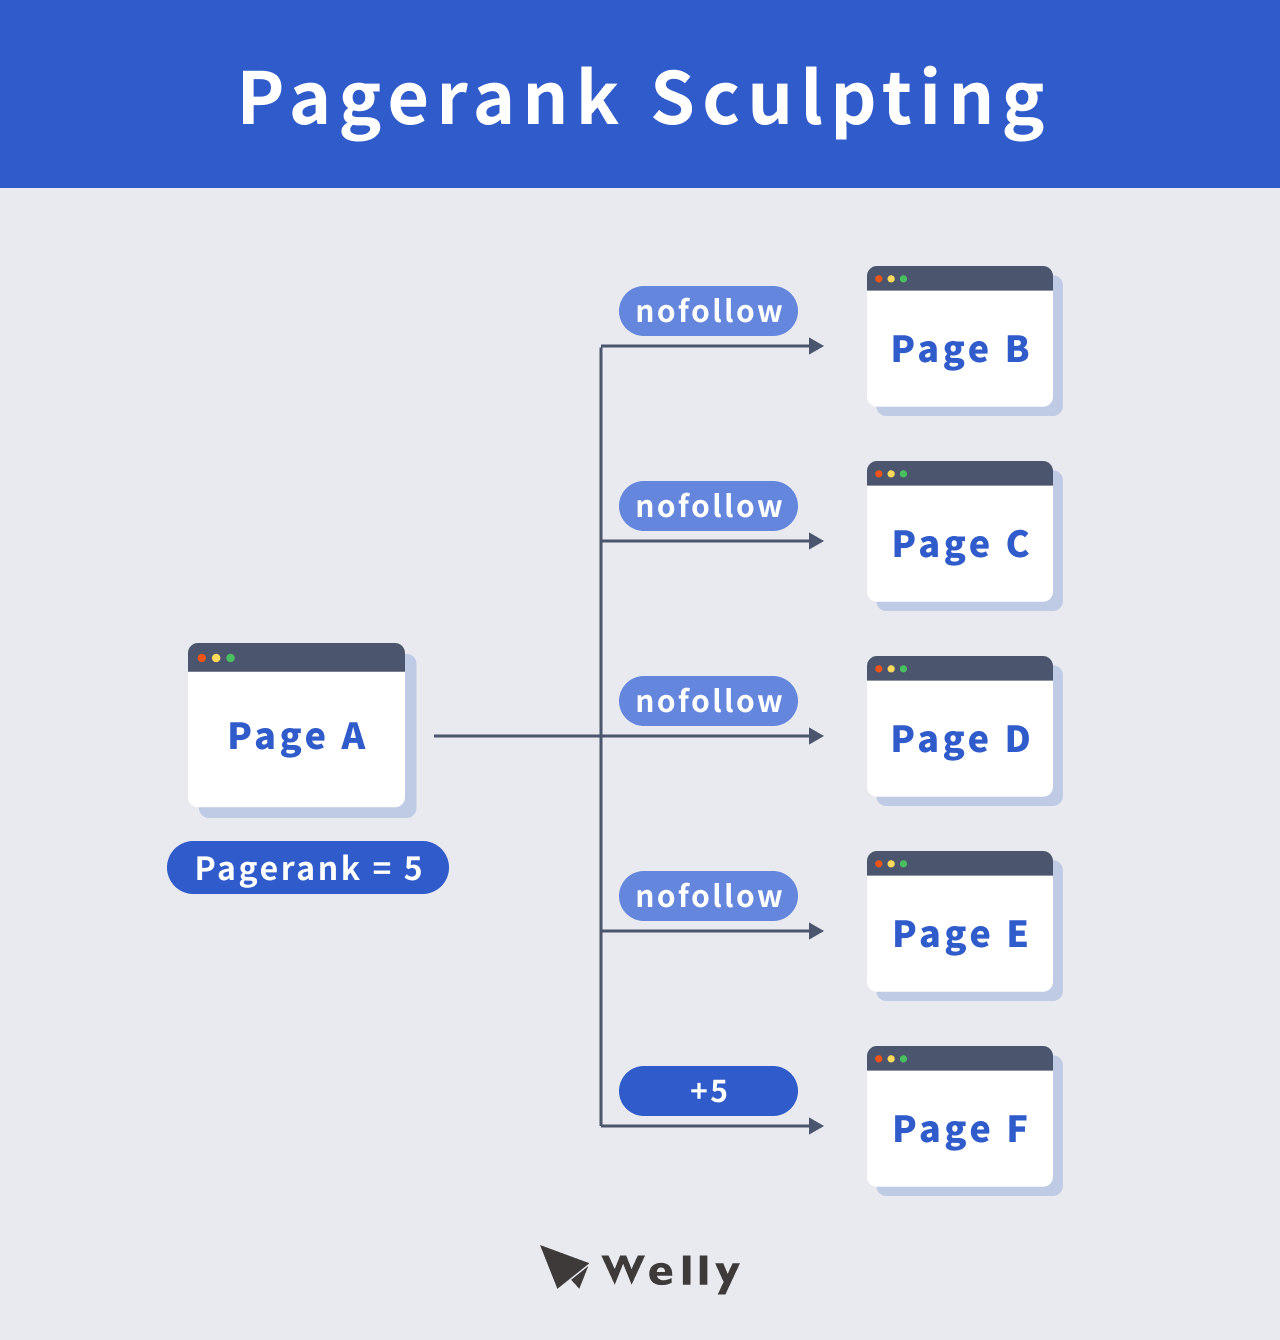 Pagerank Sculpting